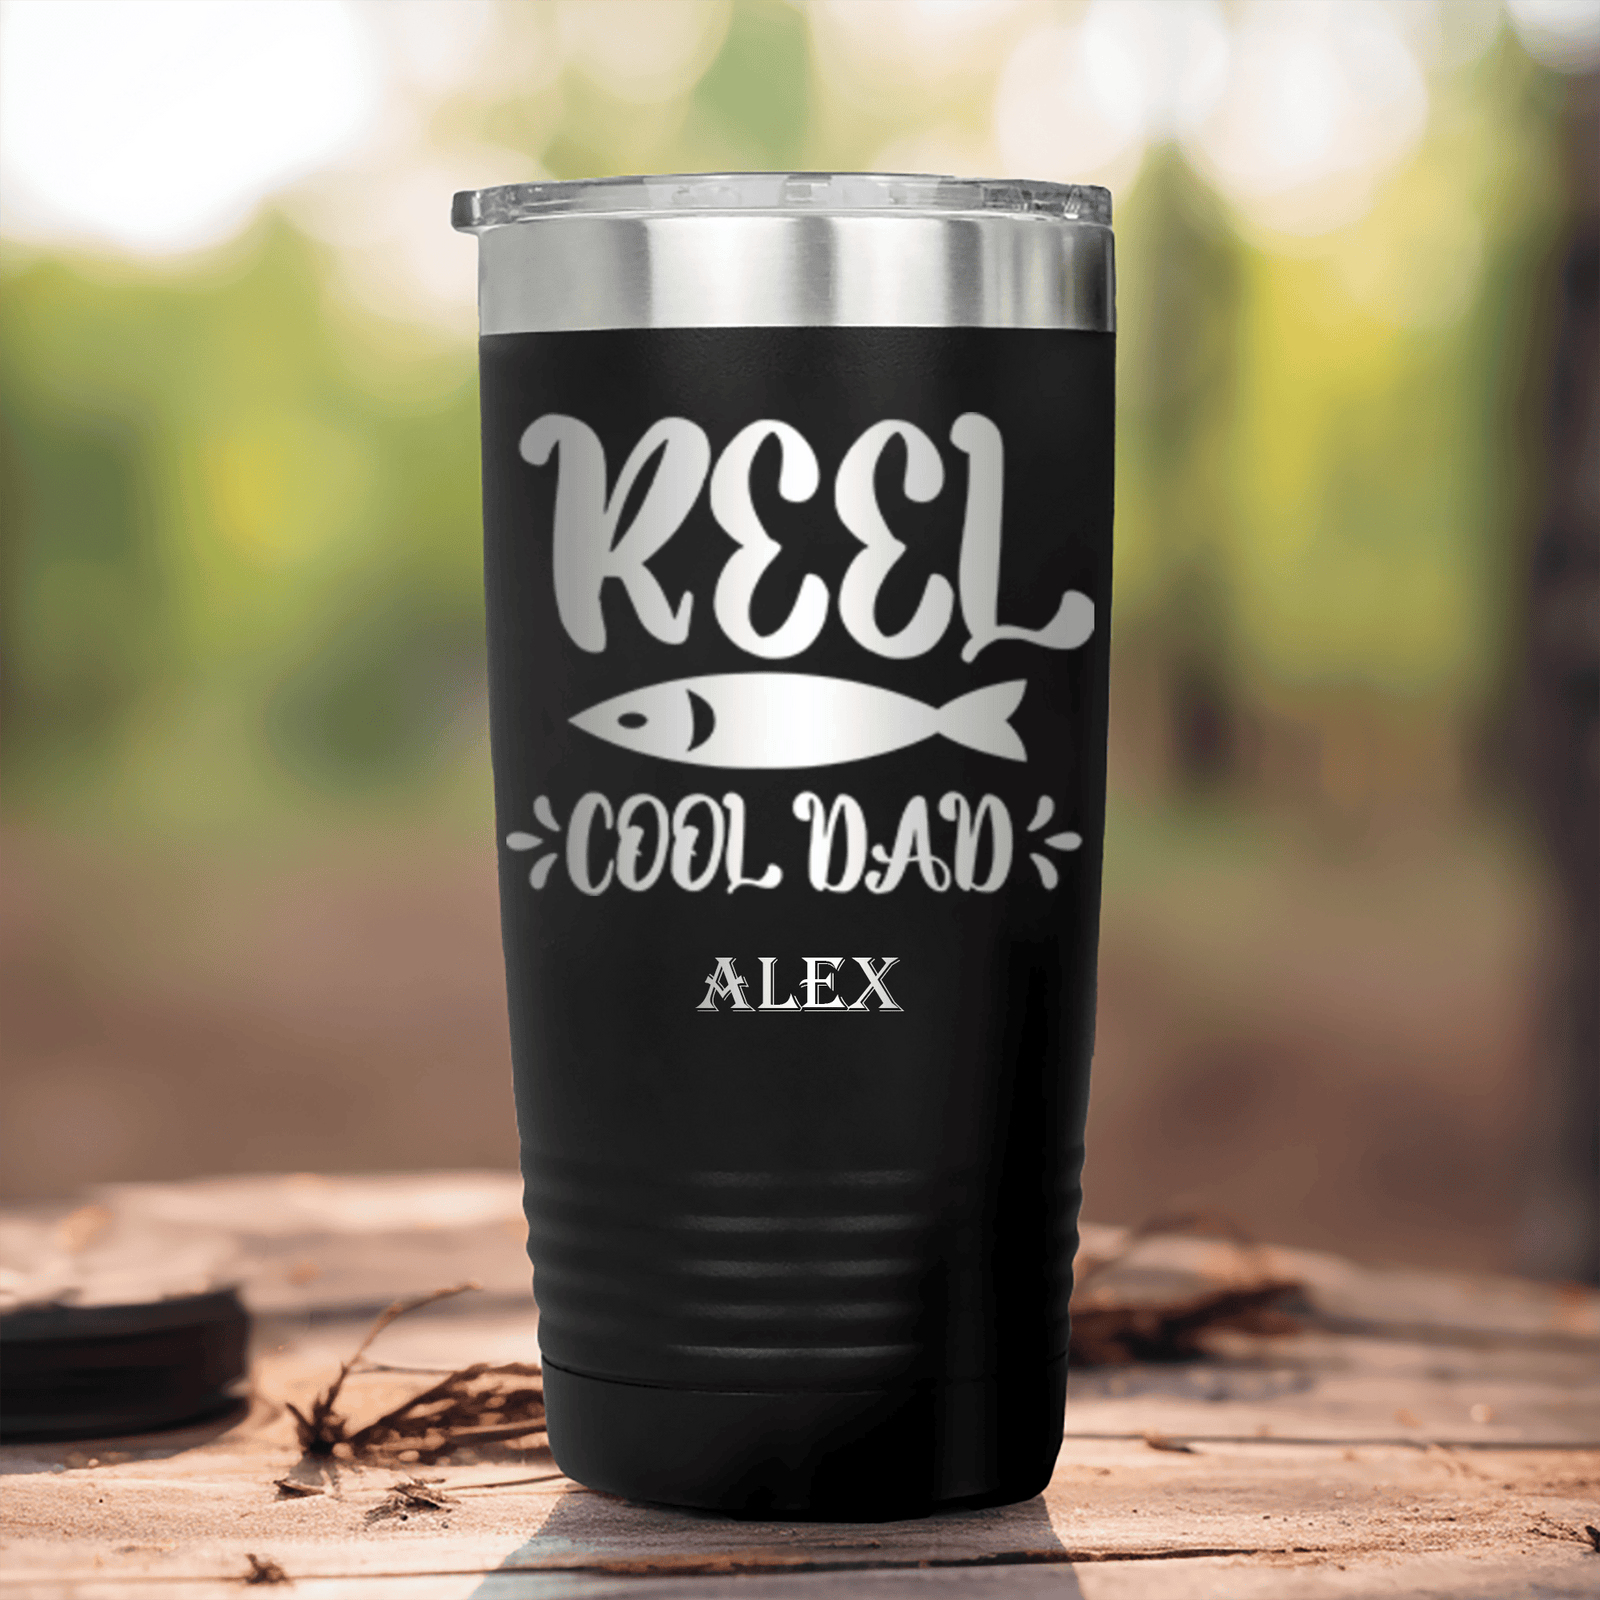 Fishing Tumbler With My Side Gig Design - Groovy Guy Gifts